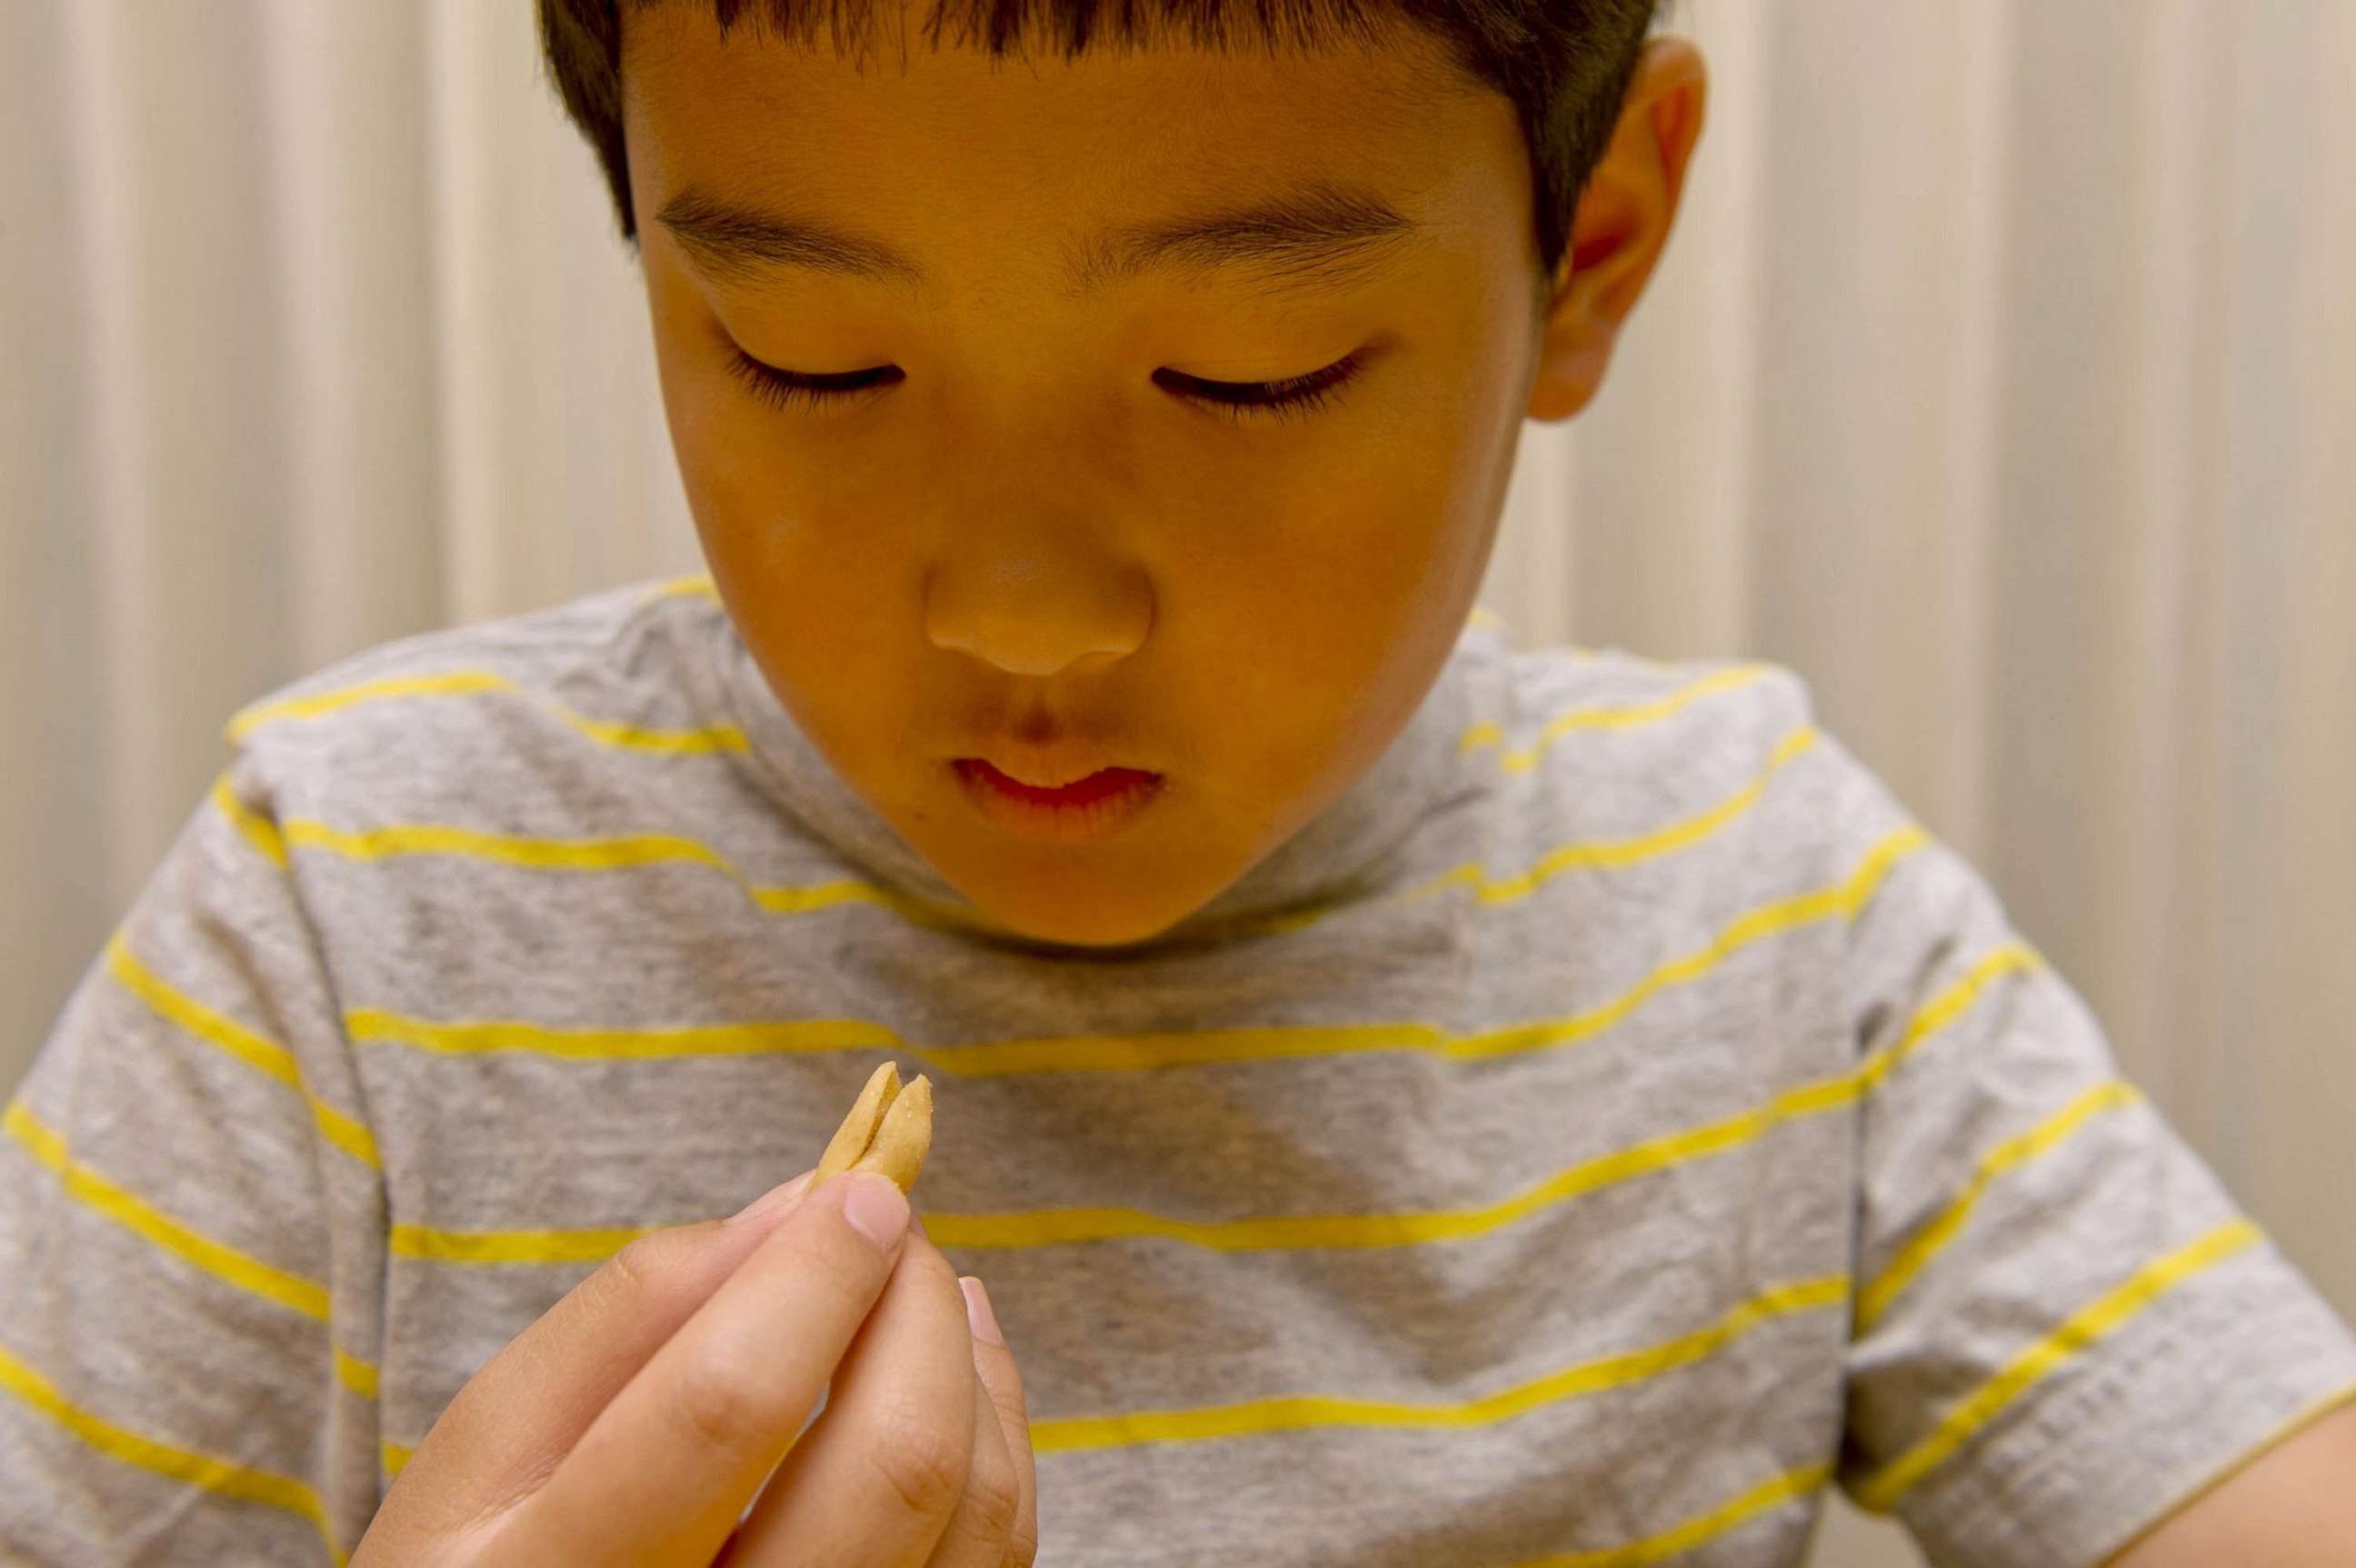 PHOTO:Michael Lee takes his peanut-allergy treatment: consuming a precisely measured dose of peanuts. The program began with a tiny amount of peanut powder mixed into liquids or soft foods in Sacramento, Calif., June 19, 2014.